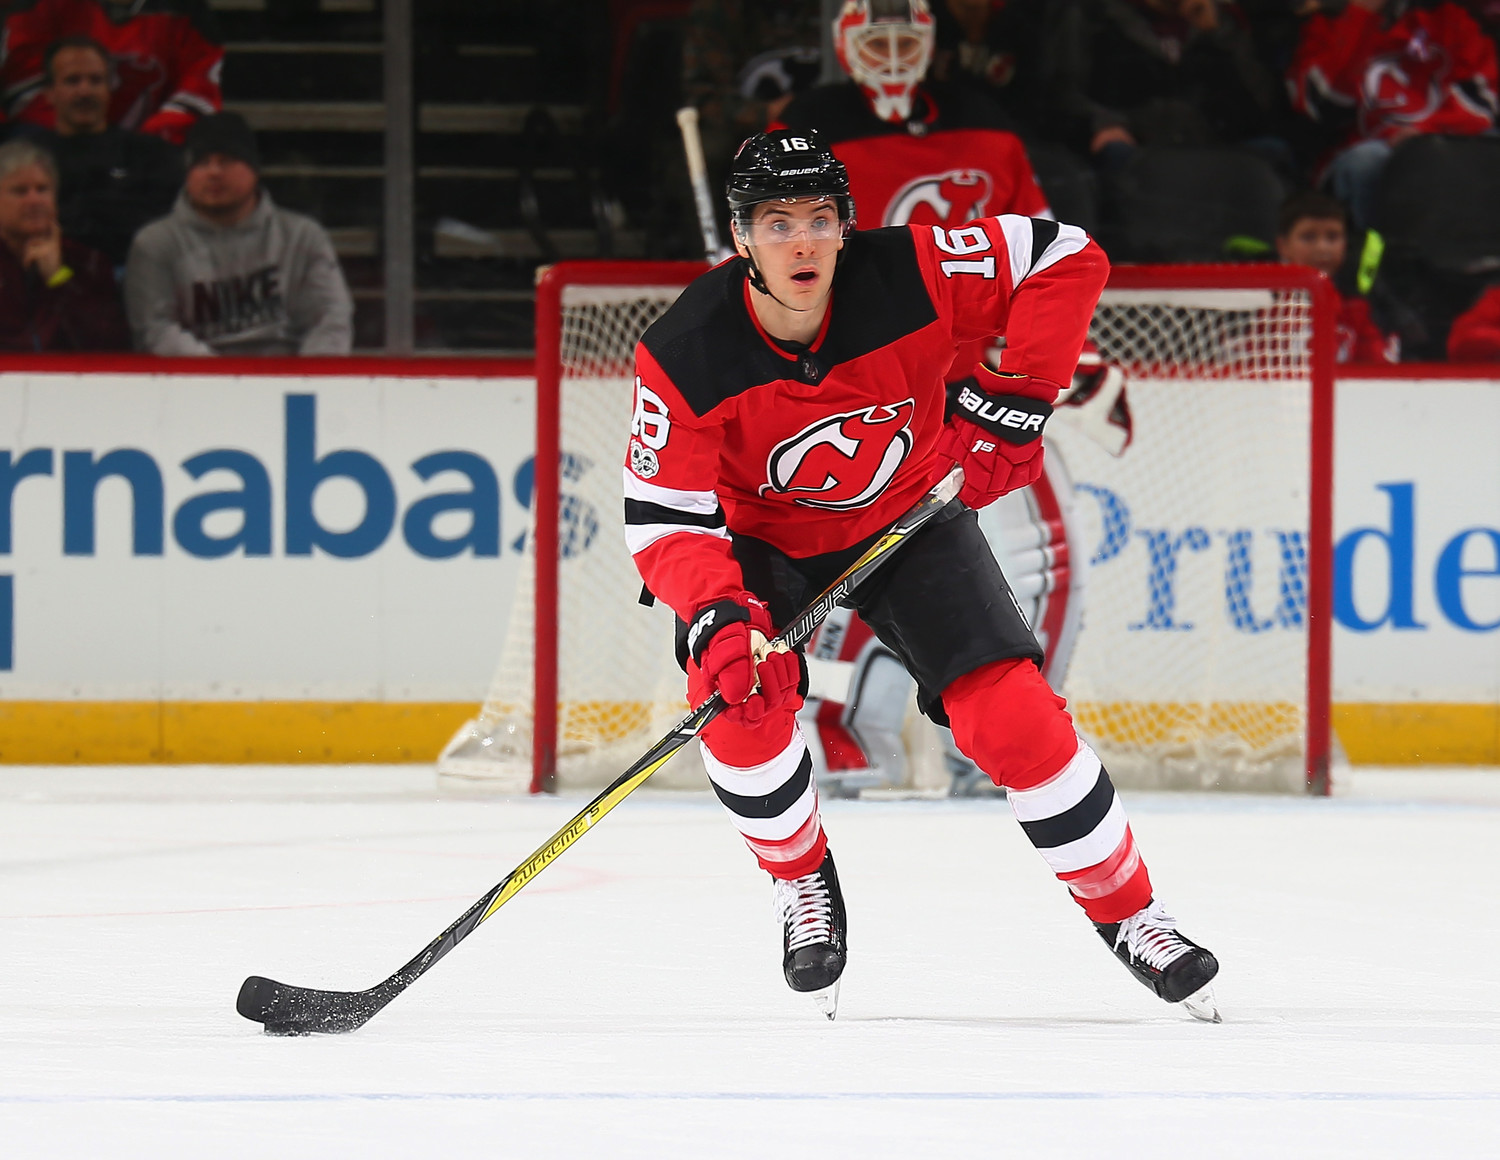 New Jersey Devils defenseman Steven Santini, who played on the hockey team at John F. Kennedy Catholic High School in Somers, looks up ice during an NHL game. Santini and his teammates find themselves chasing the Metropolitan Division championship this season after finishing with an Eastern Conference-low 70 points in 2016-2017. Santini is one of five Devils who played at Boston College.